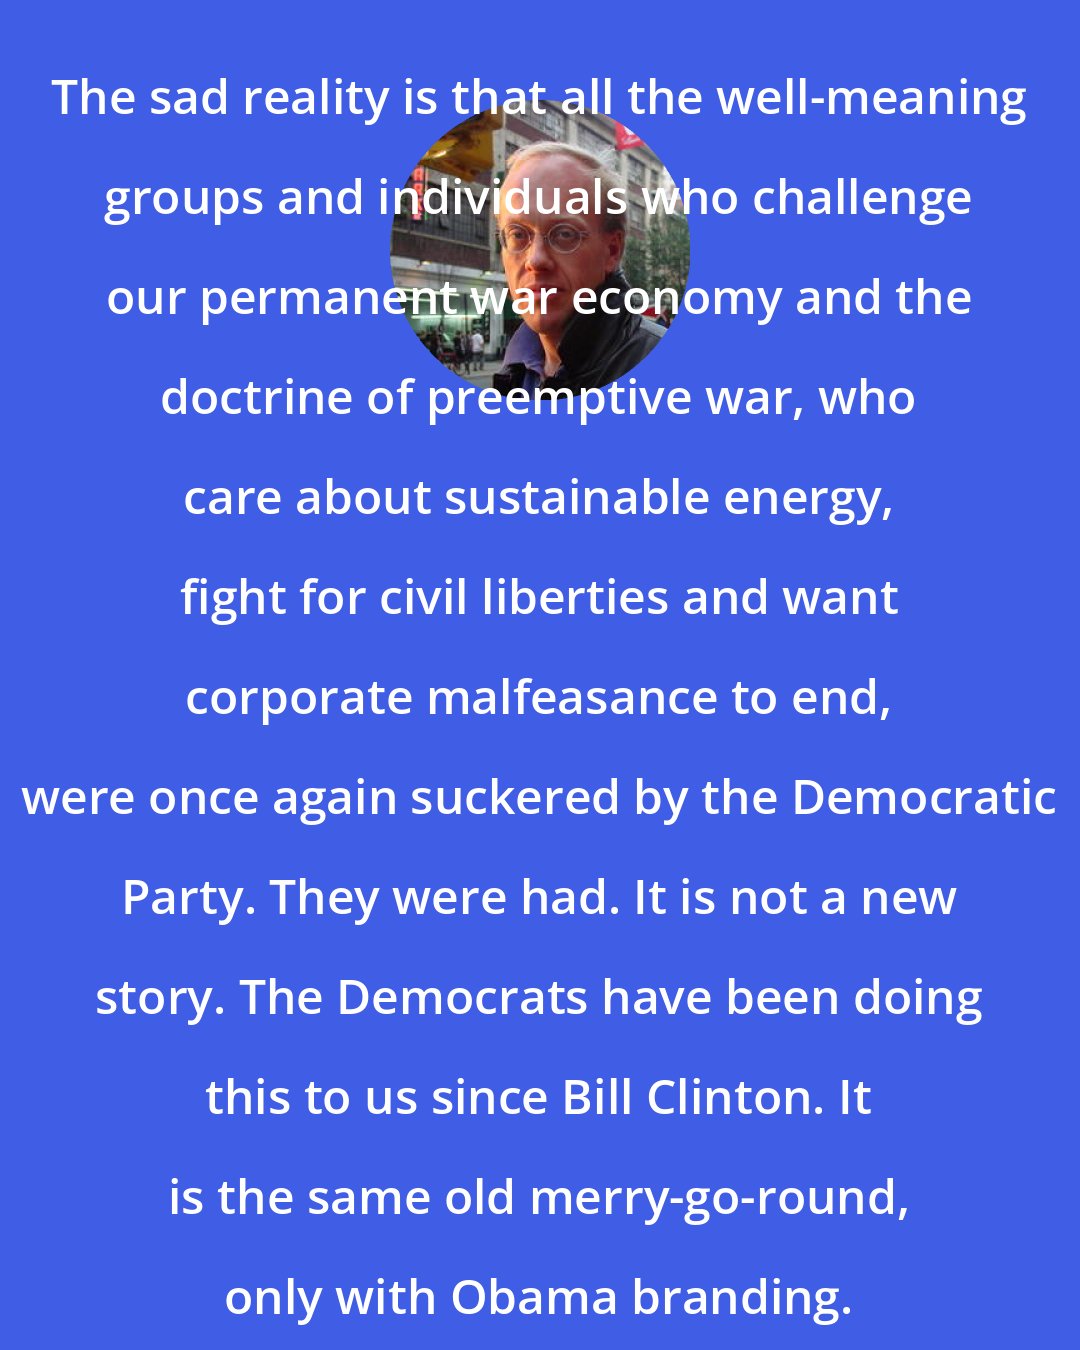 Chris Hedges: The sad reality is that all the well-meaning groups and individuals who challenge our permanent war economy and the doctrine of preemptive war, who care about sustainable energy, fight for civil liberties and want corporate malfeasance to end, were once again suckered by the Democratic Party. They were had. It is not a new story. The Democrats have been doing this to us since Bill Clinton. It is the same old merry-go-round, only with Obama branding.